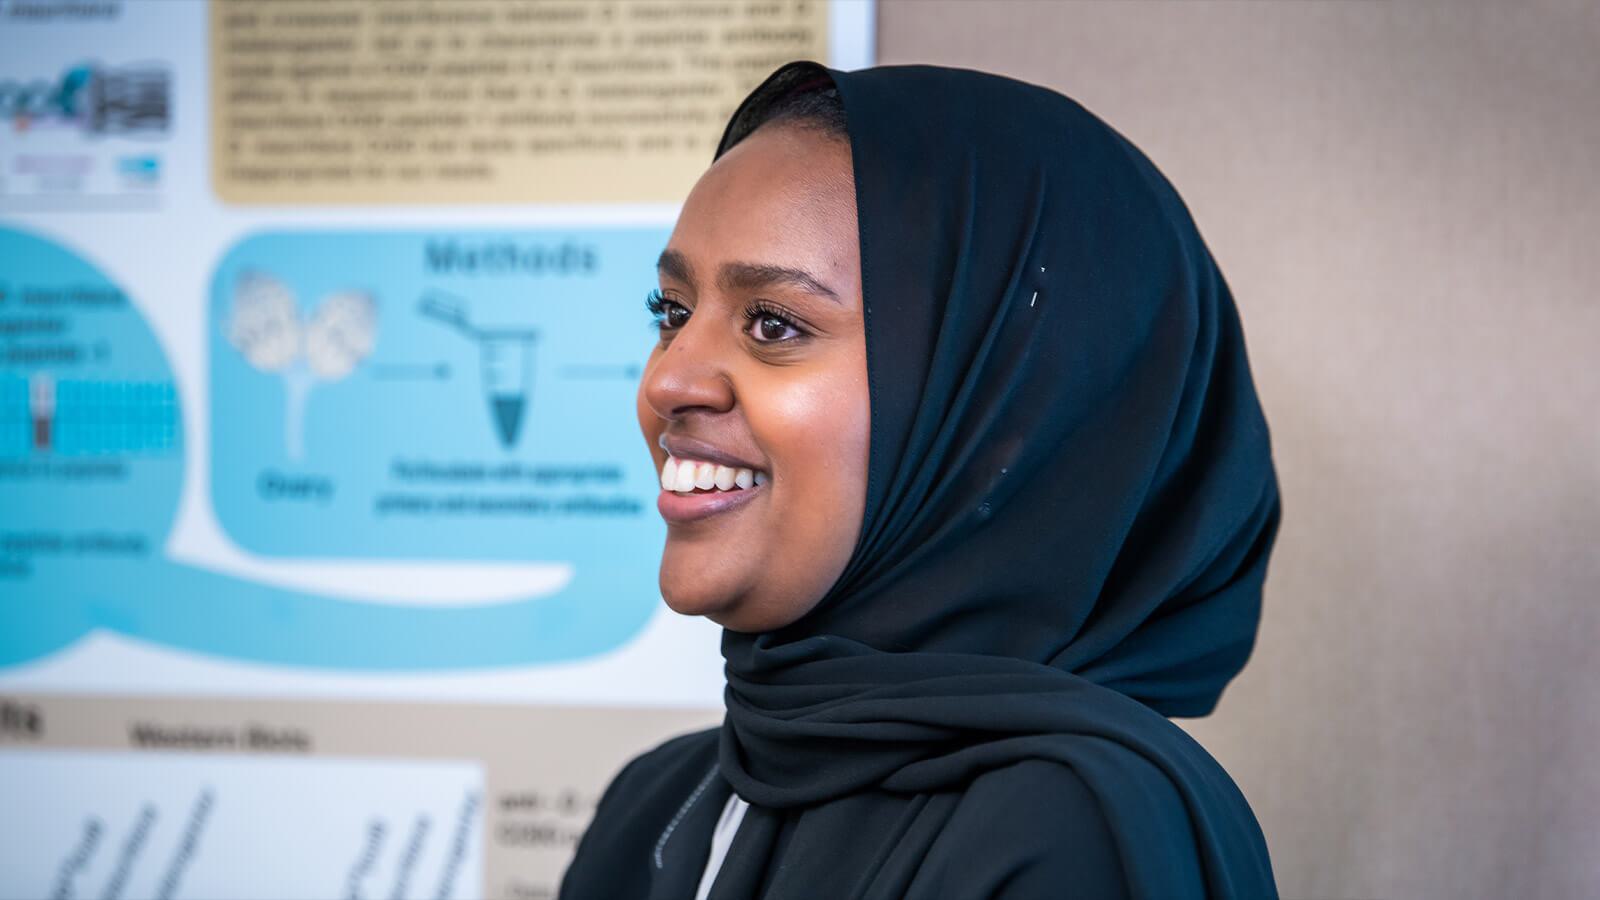 Side view of woman smiling in front of science poster